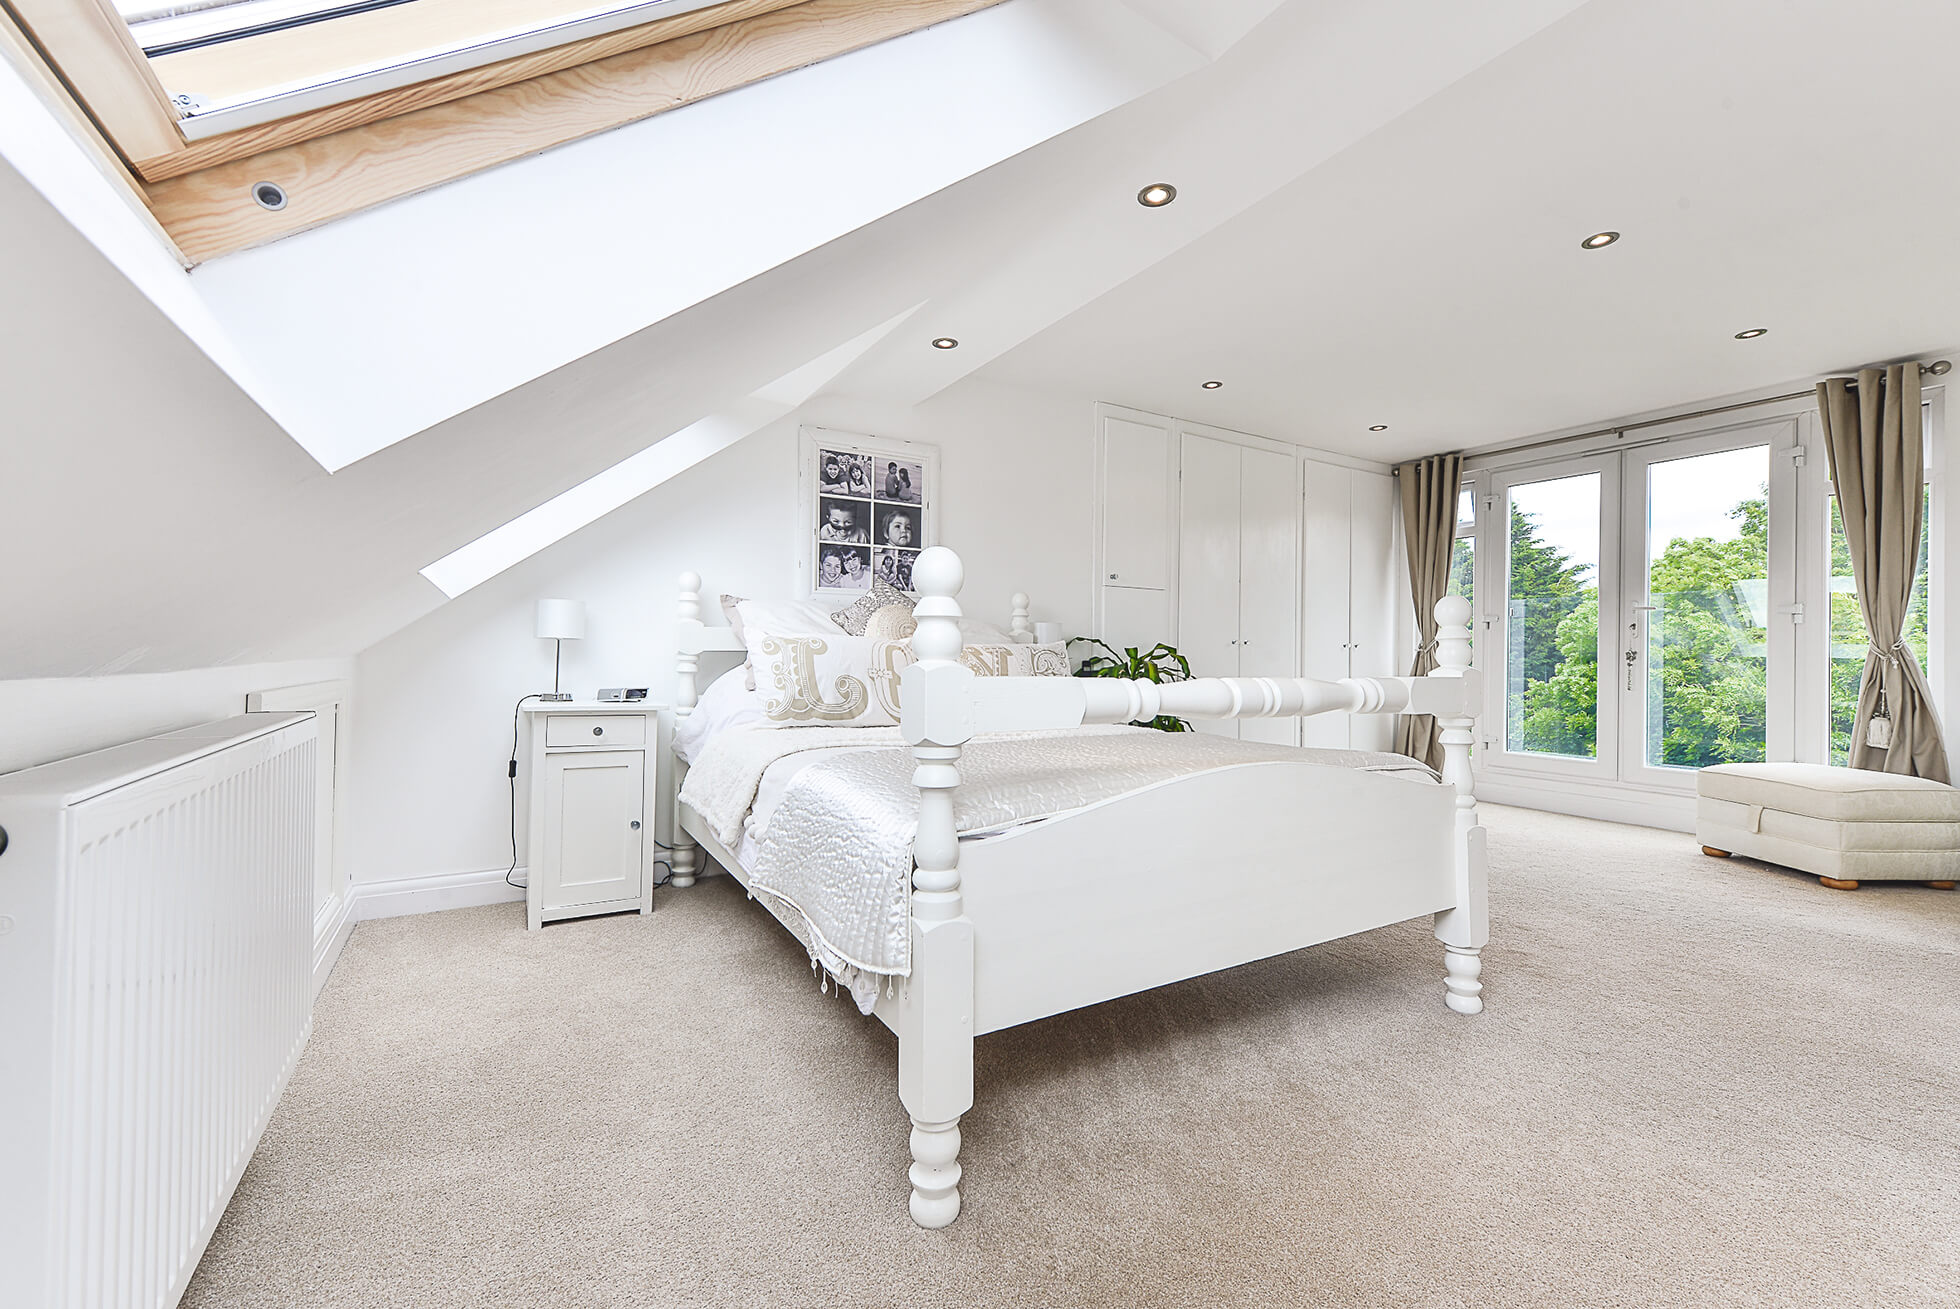 Do you have a question about converting your Loft in Wallington? Here are the most popular questions asked by our clients.